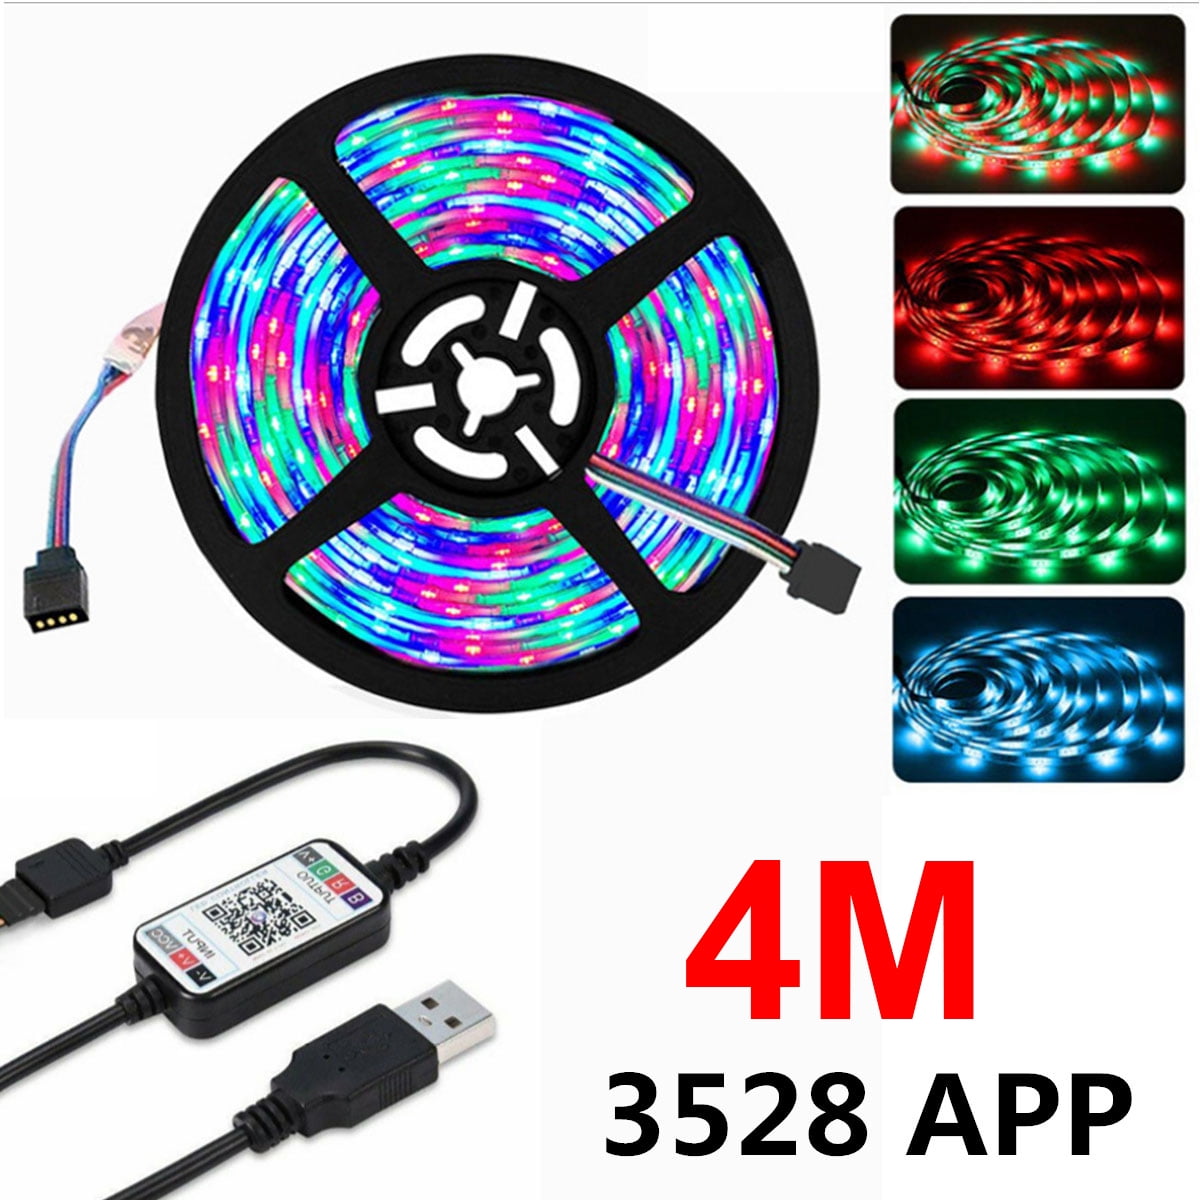 Led Lights for TV 9.8ft RGB Smart TV Backlight Bluetooth APP Control 16 Million Colors & Multi Scene Modes Music Sync for Flat Screen TV /PC by USB Powered 